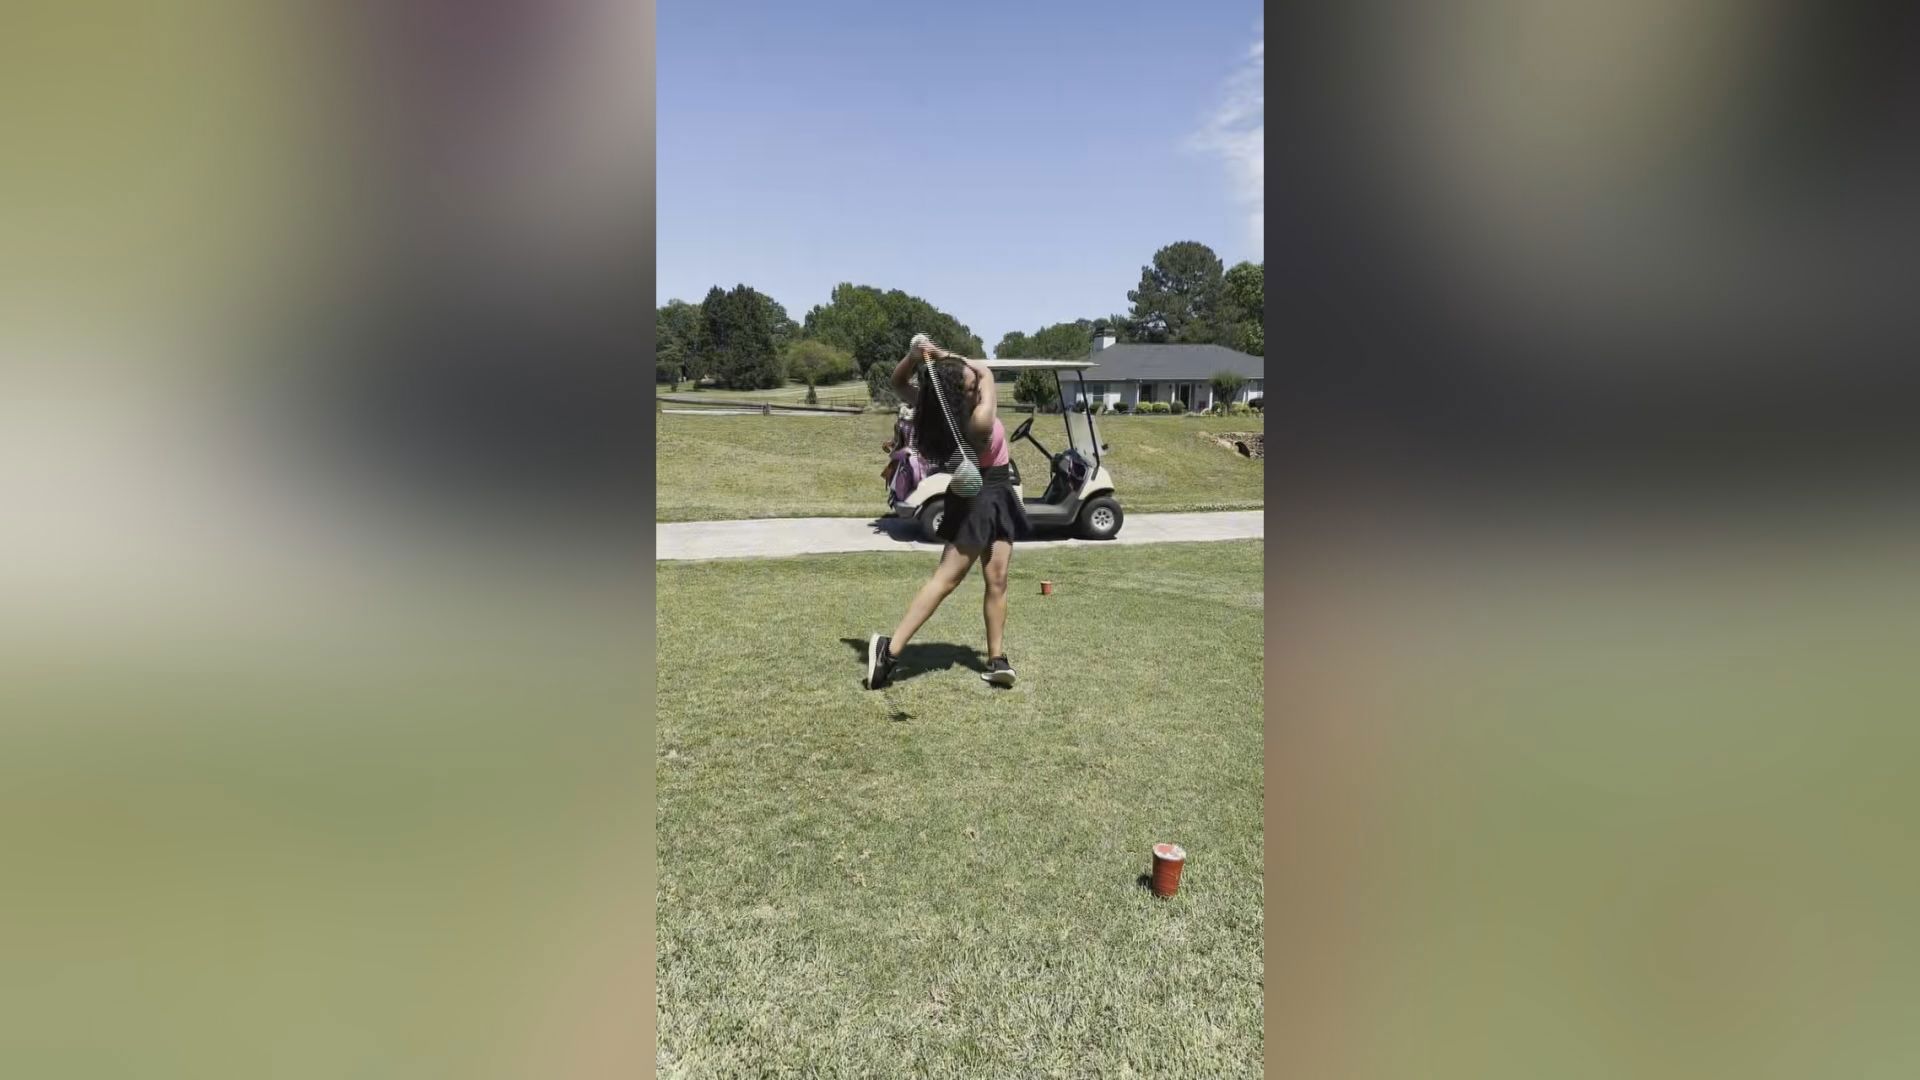 WFMY News 2's Sydni Moore shares why she enjoys golf. She learned how to play from her Uncle.